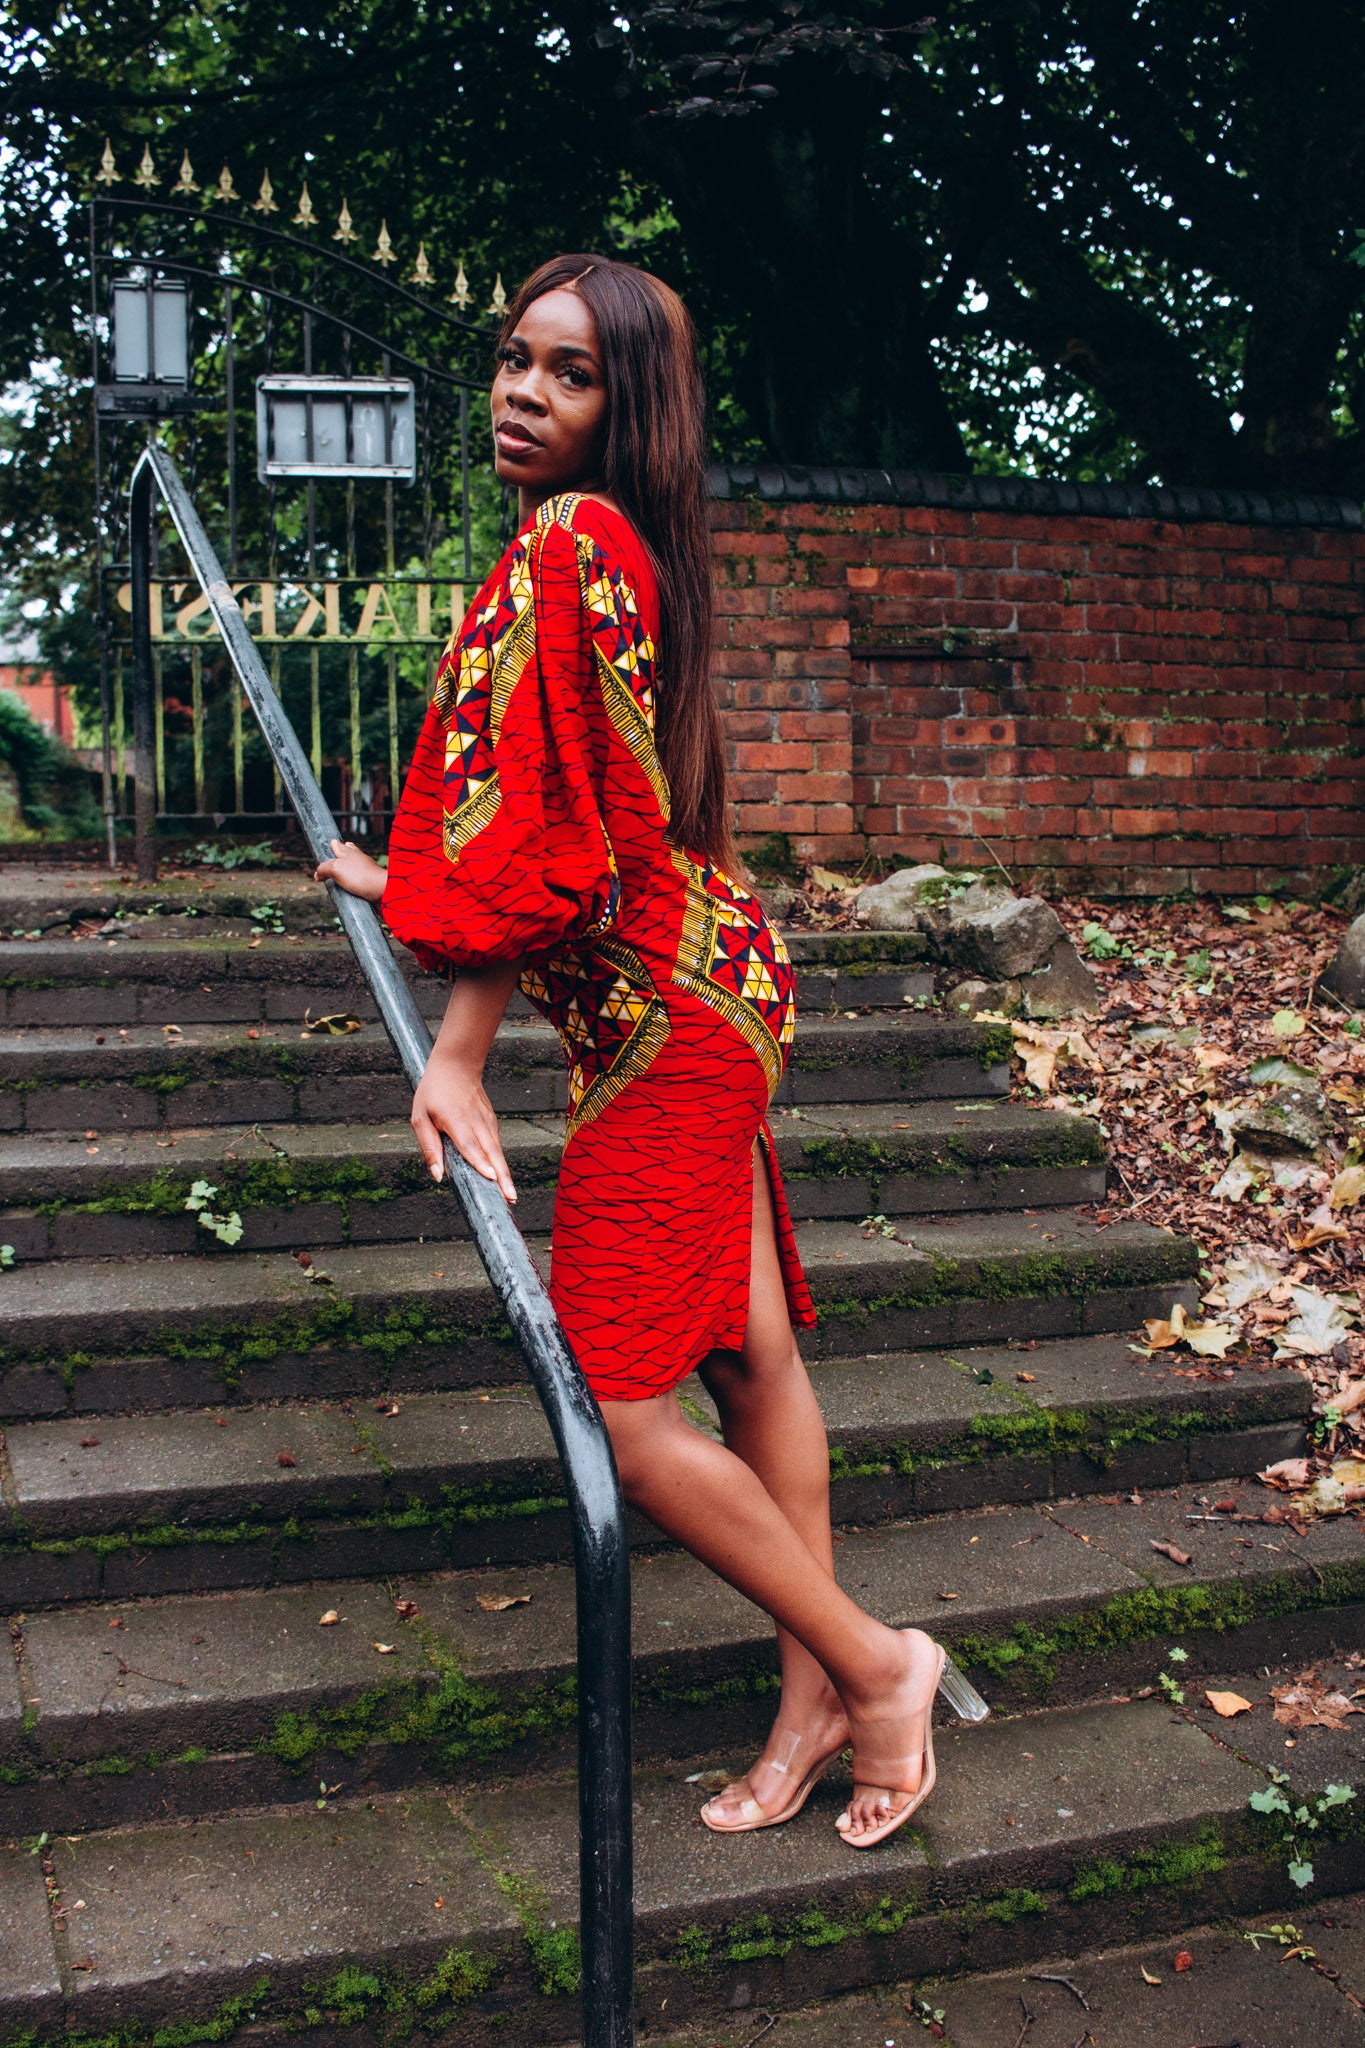 Ankara wax print African geo-shaped Triangle  pattern in red, yellow and black on long  three quarter ballooned sleeves, closed neckline, knee high body hugging pencil dress with belt feature.